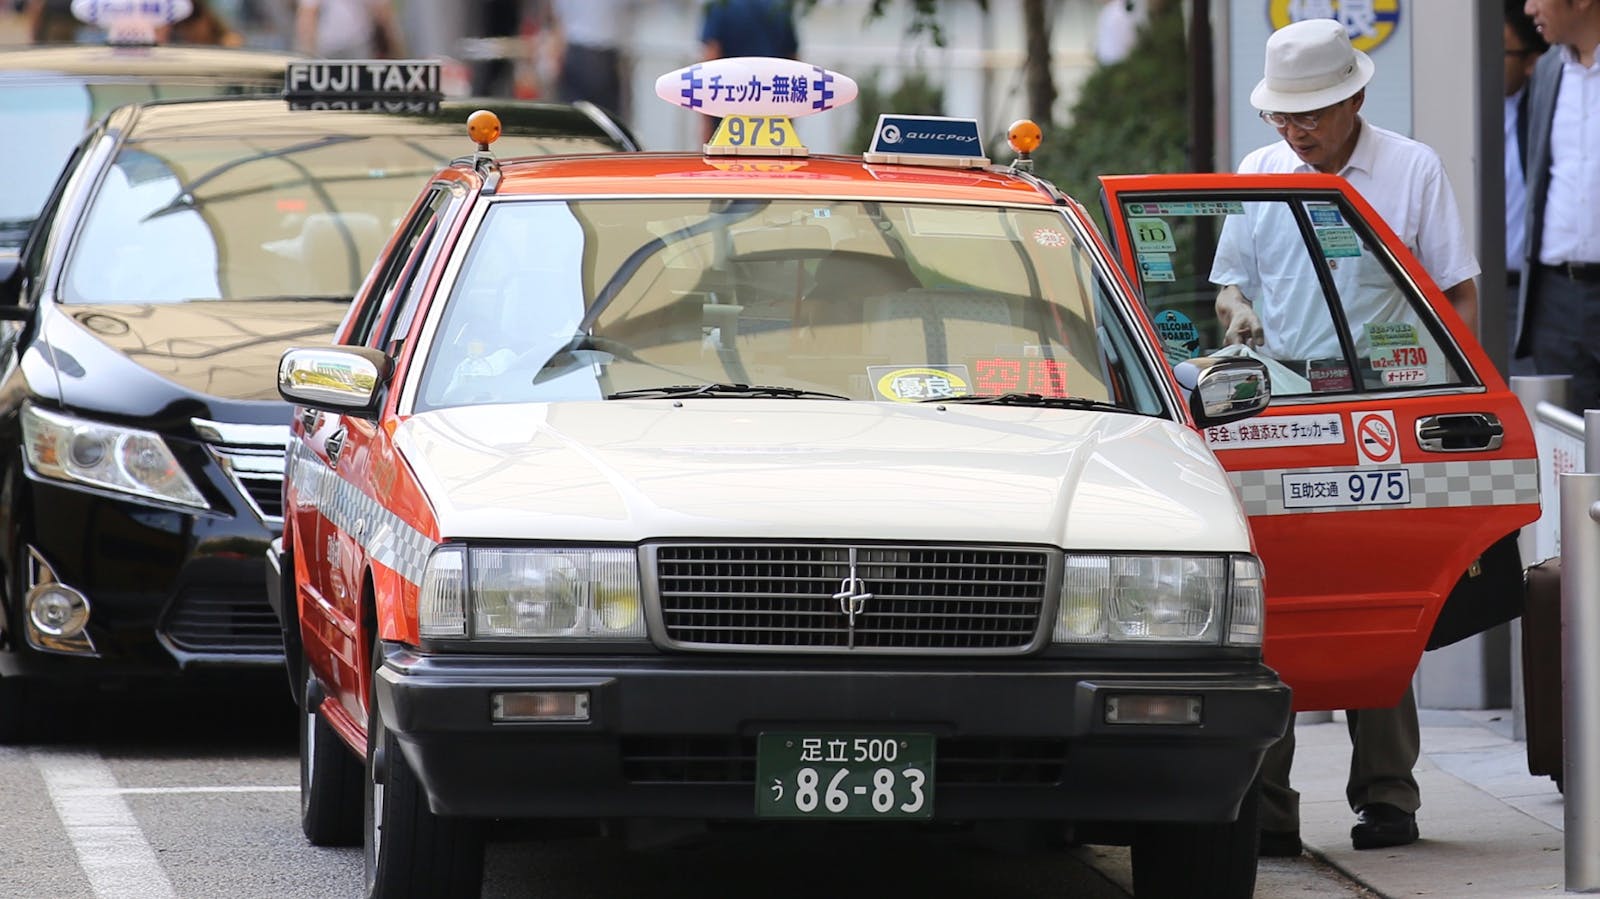 Taxis at a taxi stand outside a train station in Tokyo. Photo: Bloomberg